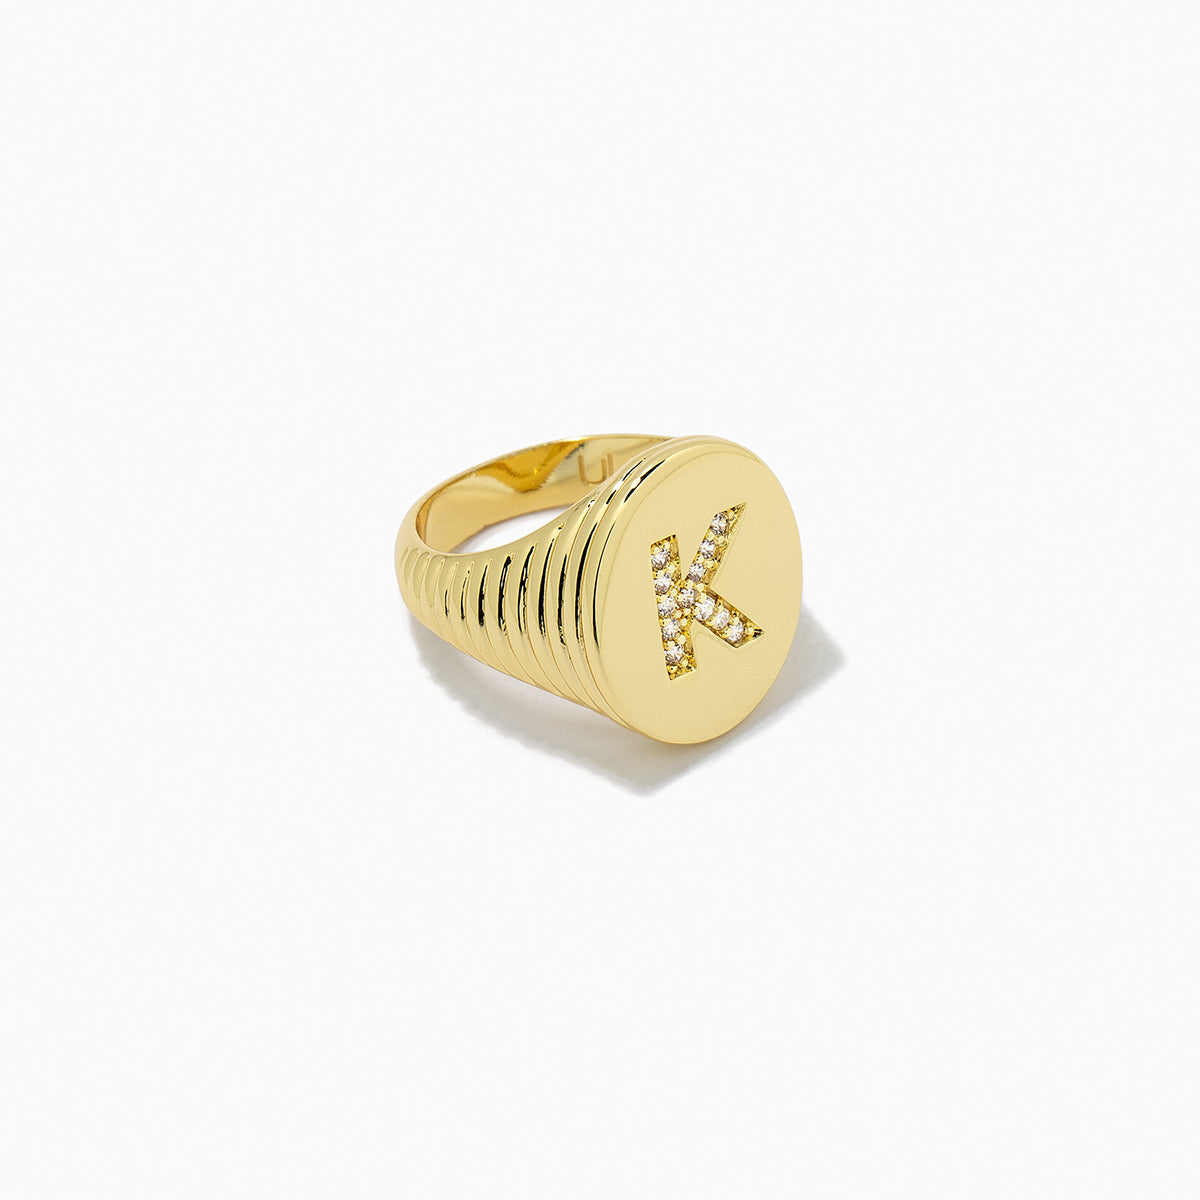 Initial Here Ring | Gold K 6 Gold K 7 Gold K 8 | Product Image | Uncommon James